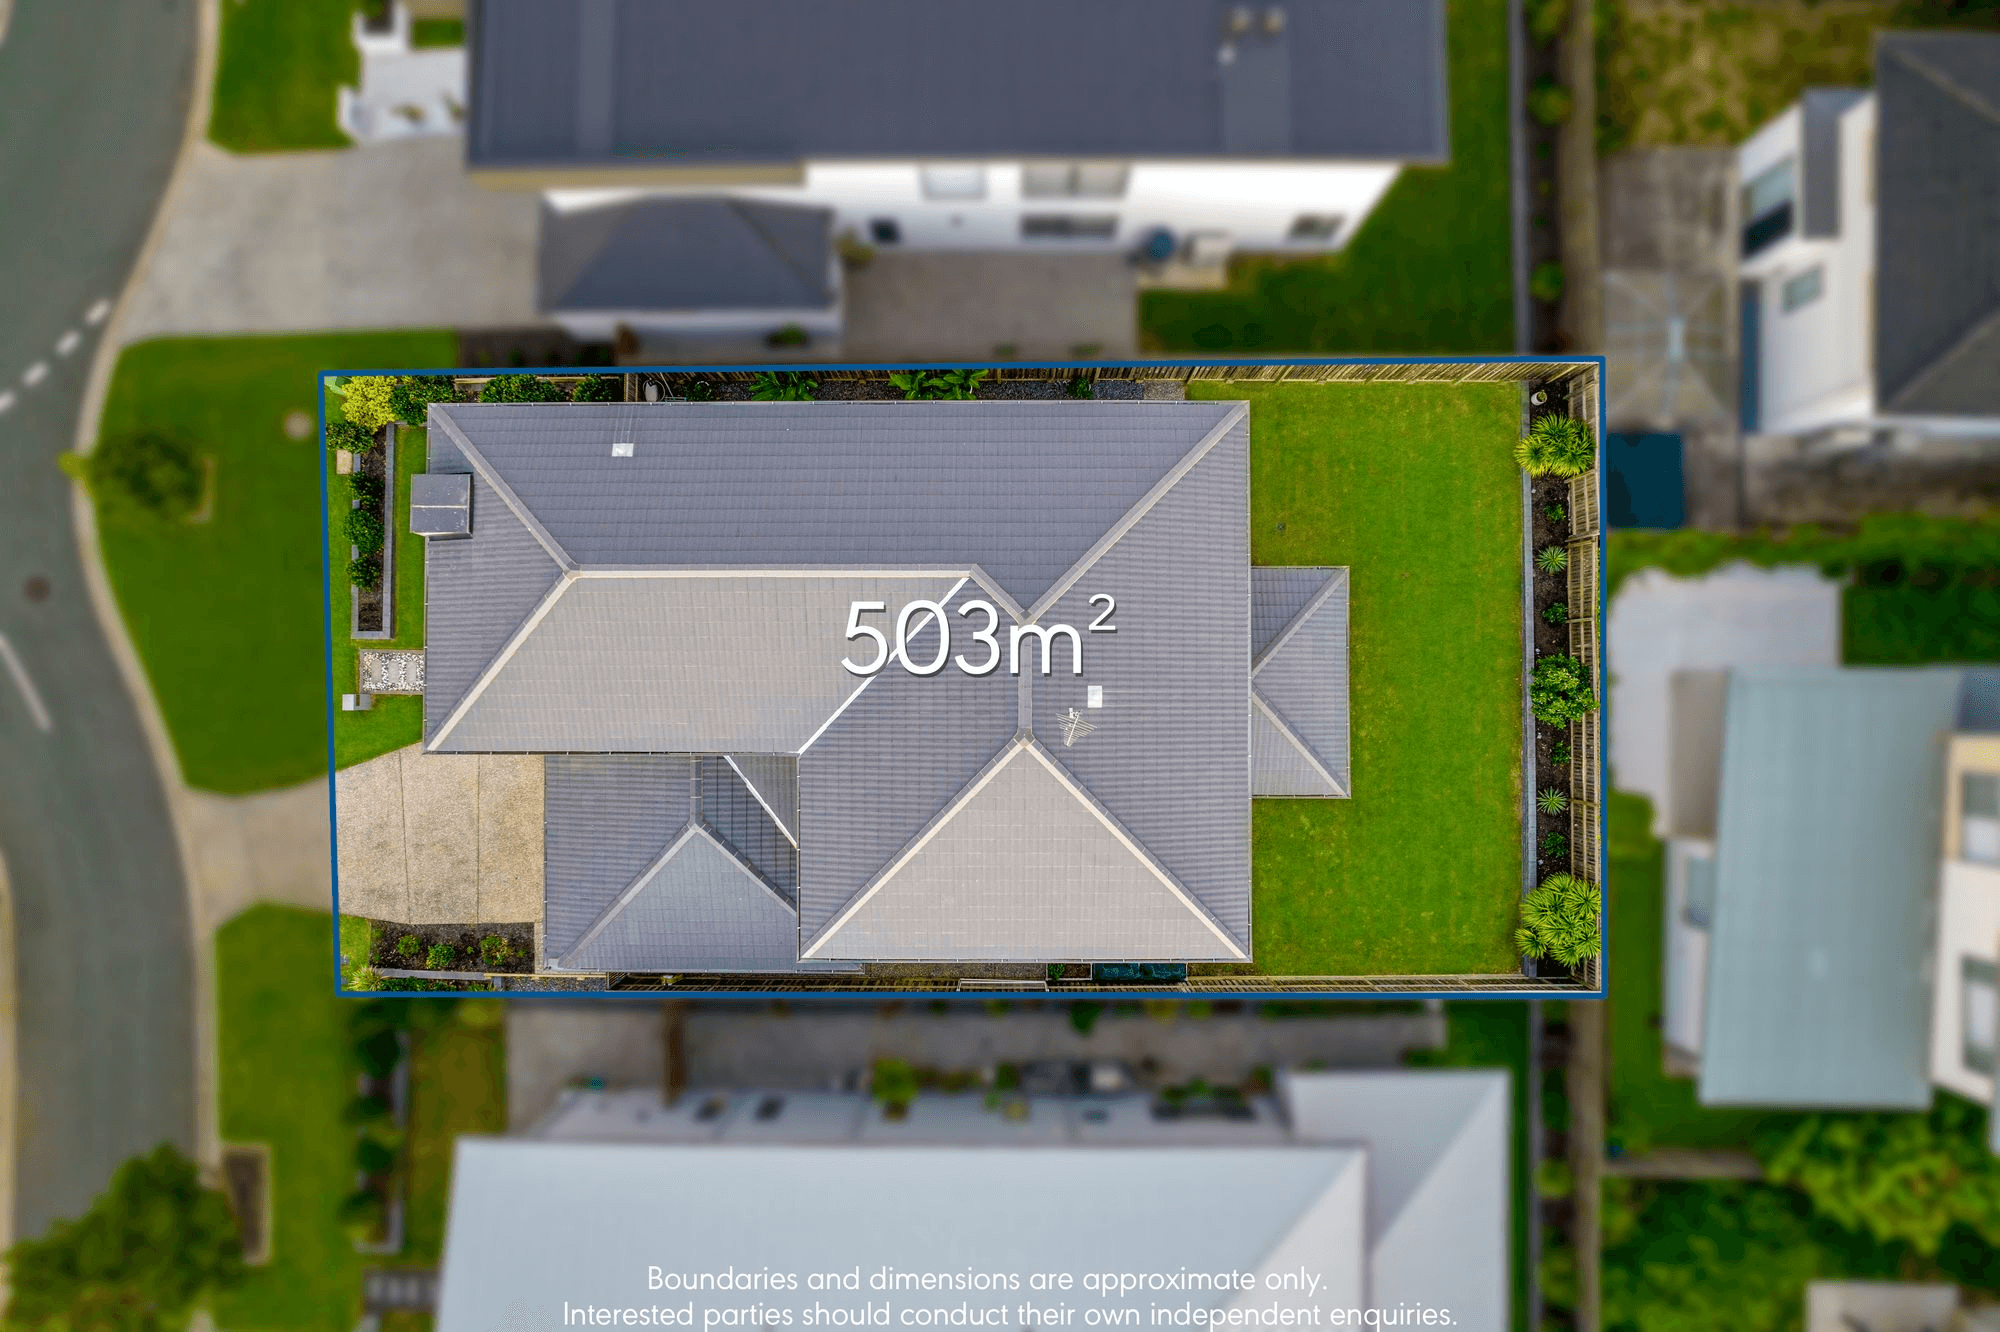 15 Tomewin Street, ROCHEDALE, QLD 4123